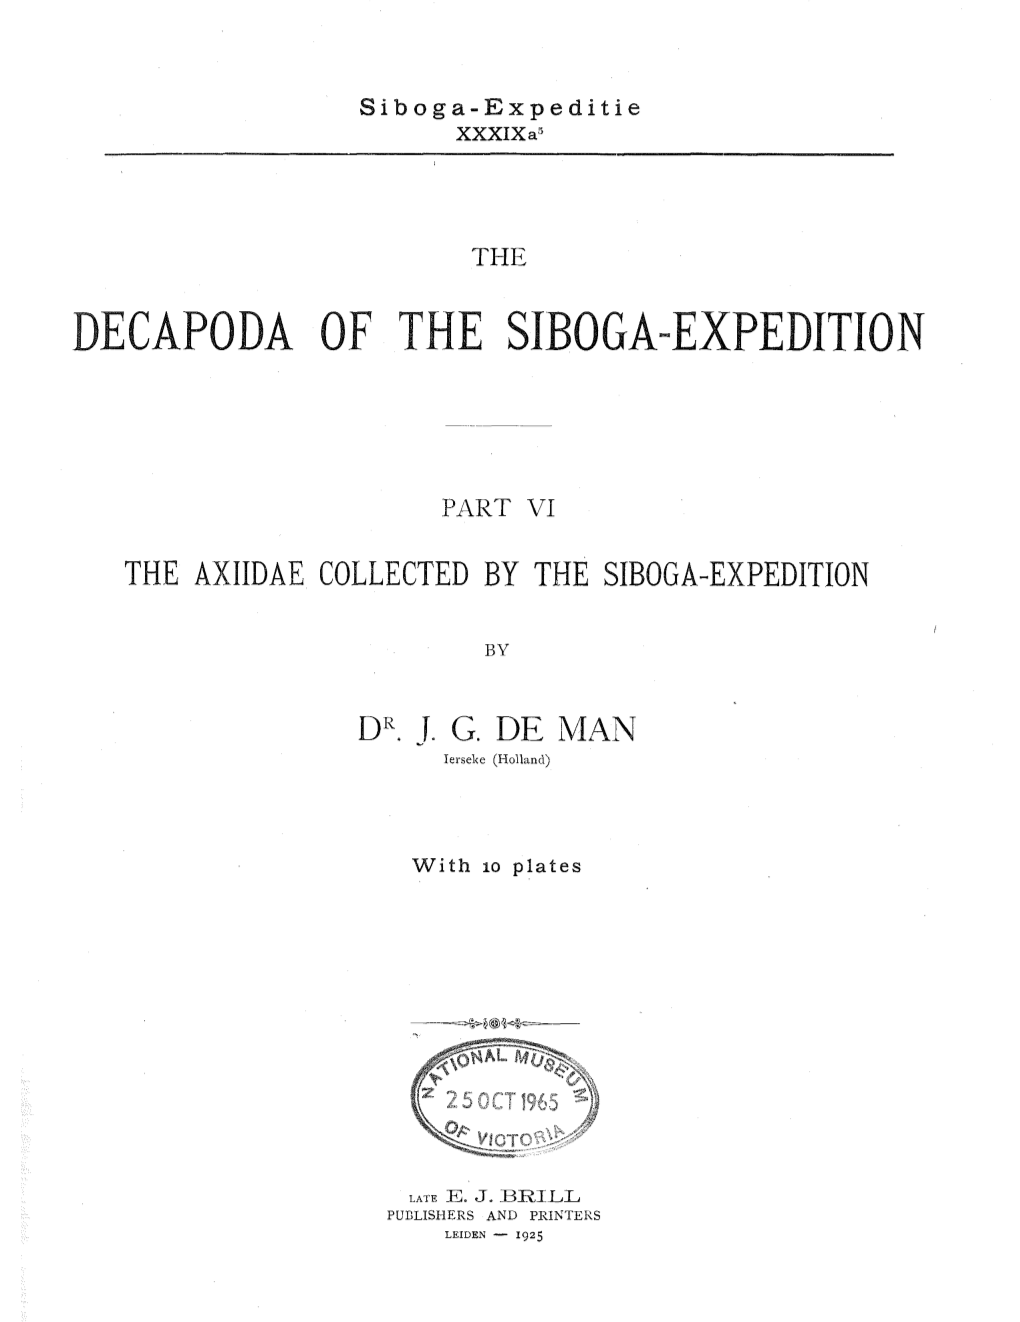 Decapoda of the Siboga-Expedition